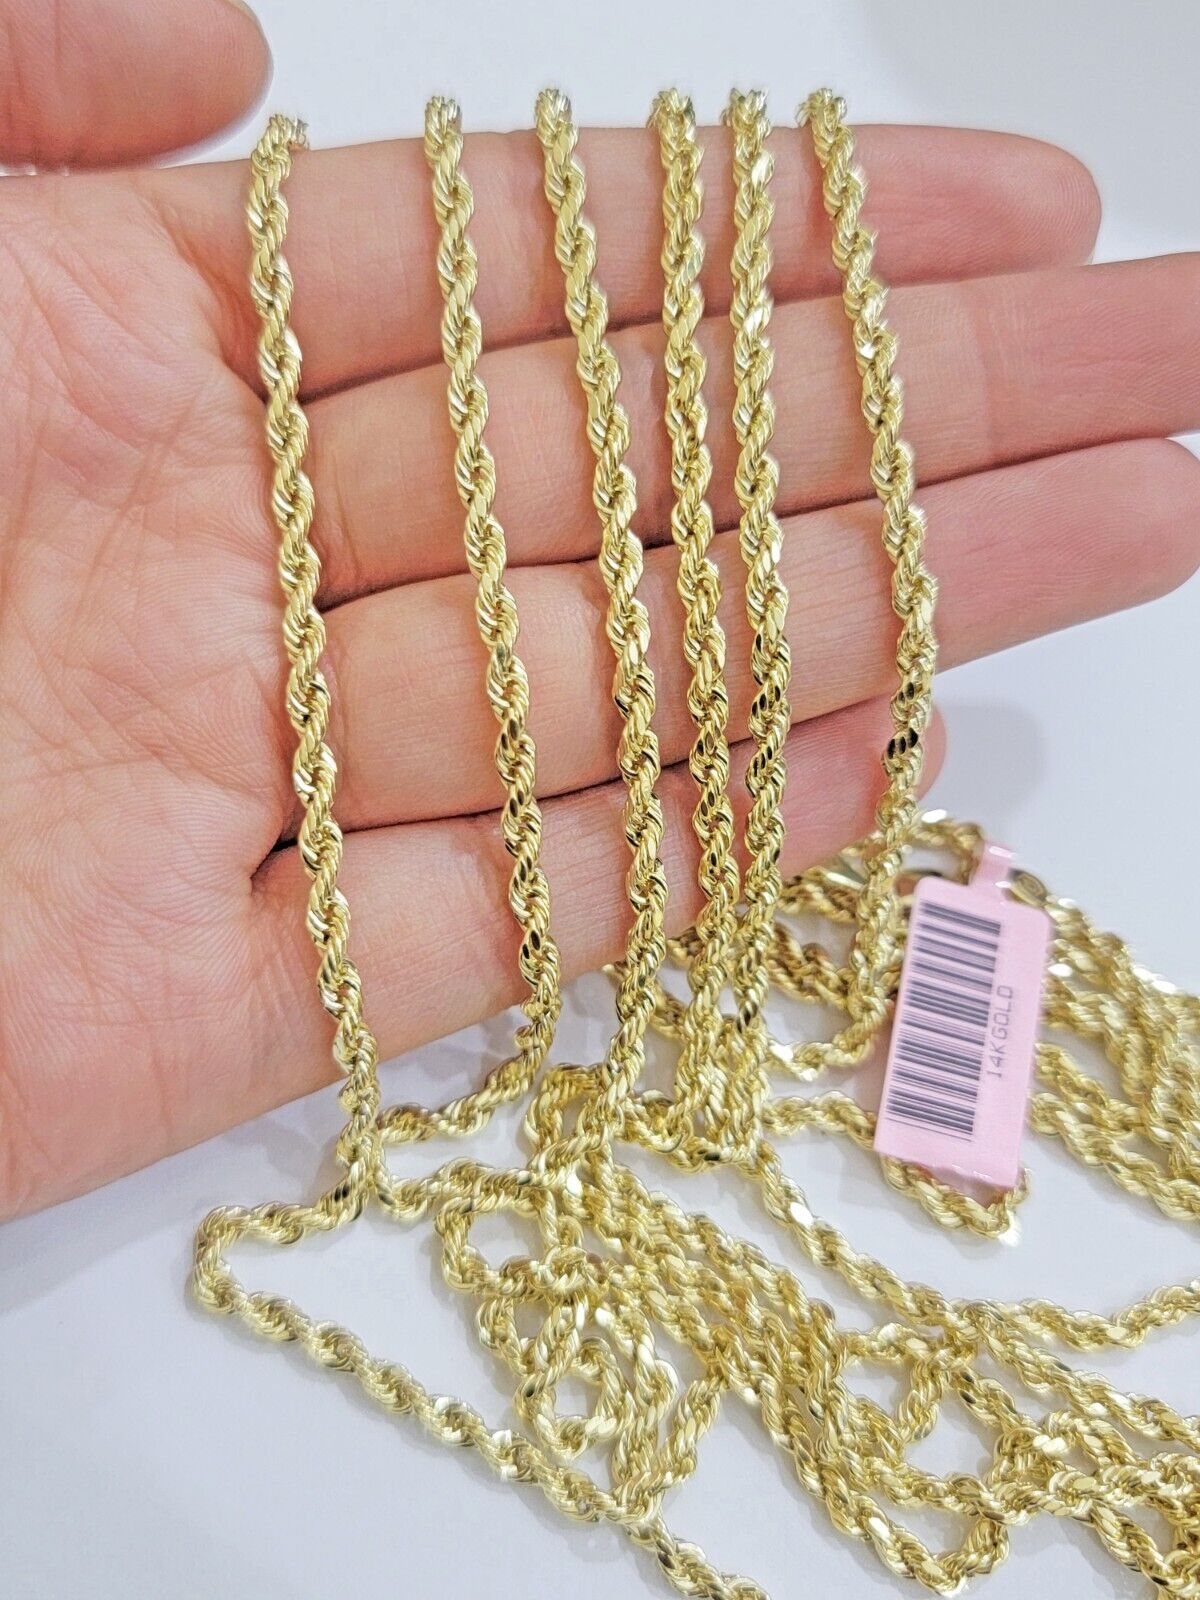 Real 14k Yellow Gold Rope Chain Necklace 28 Inch 3mm Diamond Cut Men Women SOLID